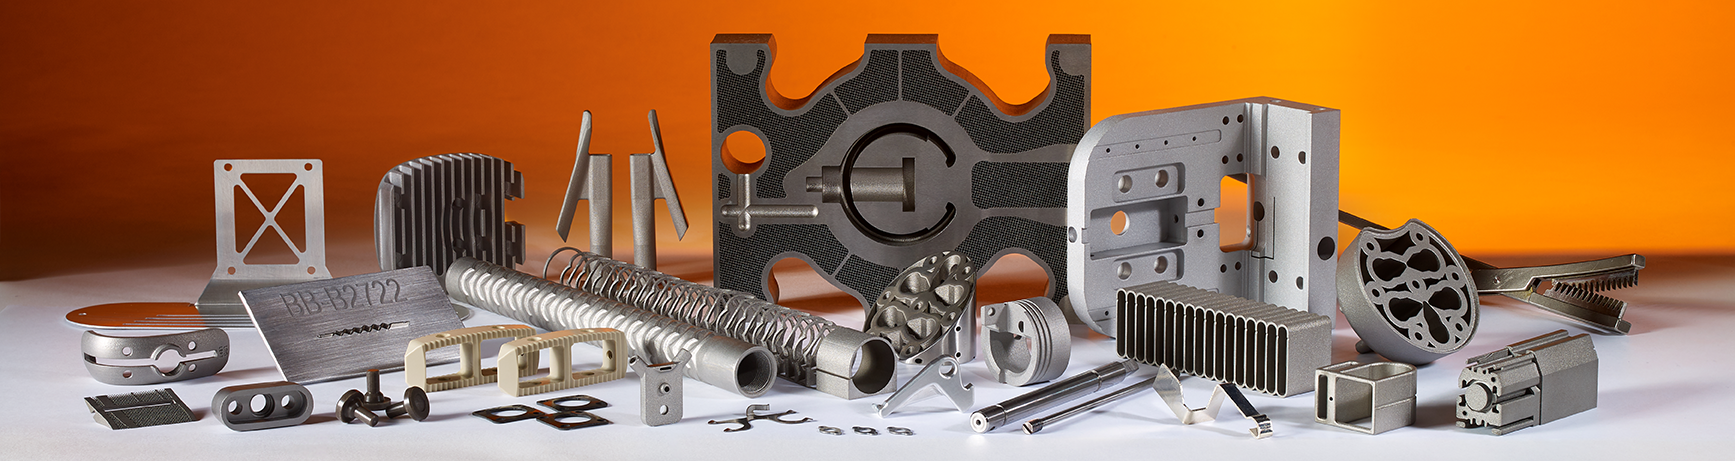 metalcraft_homepage banner_resized